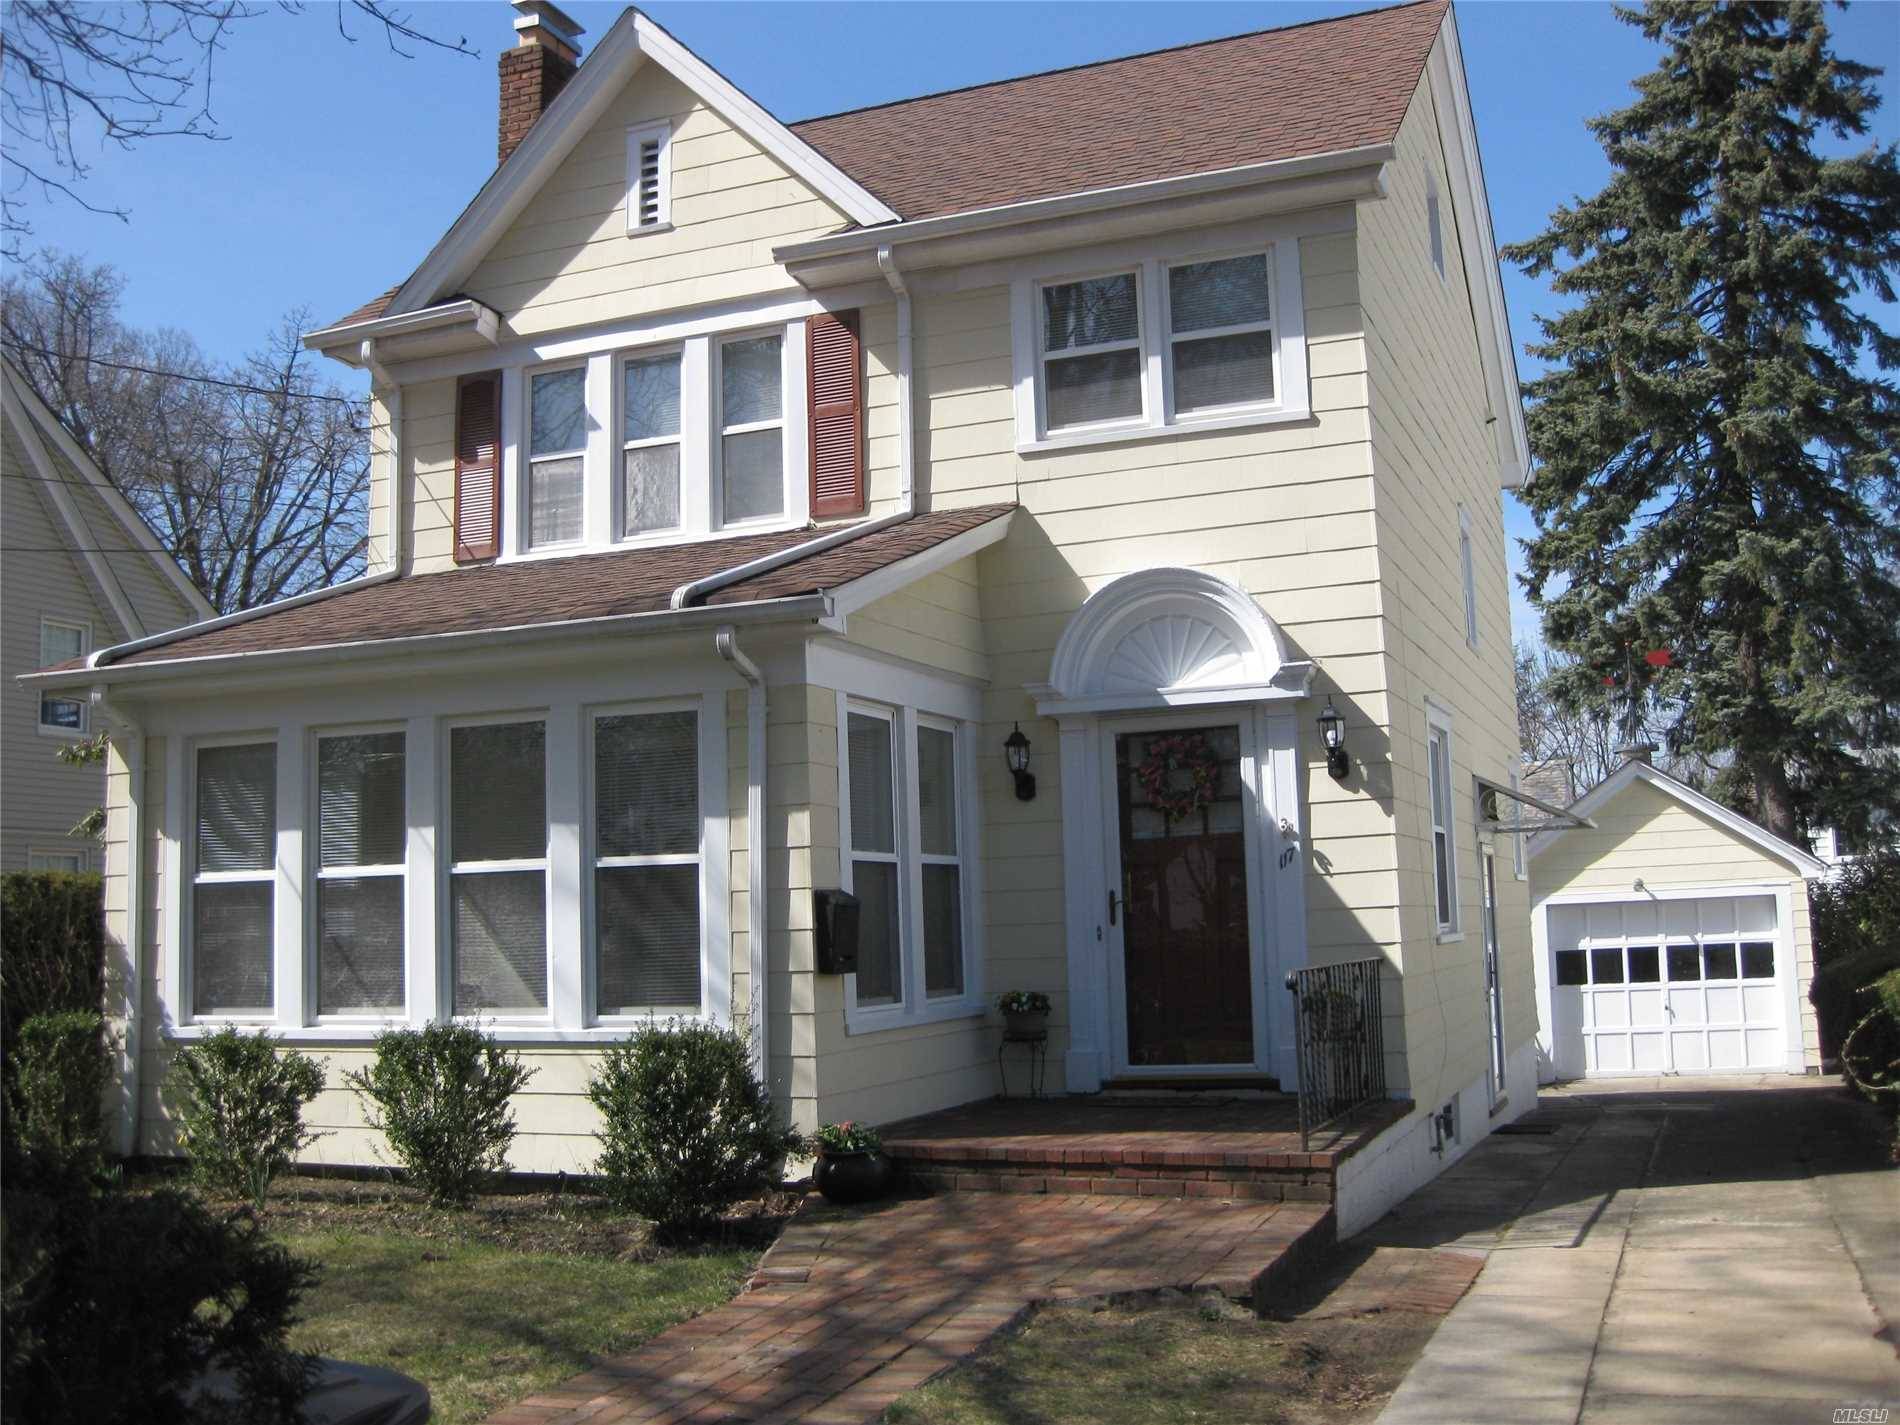 Classic 7 Room Renovated Colonial, Convenient To Town, Library, Park, Public Transportation & Train.